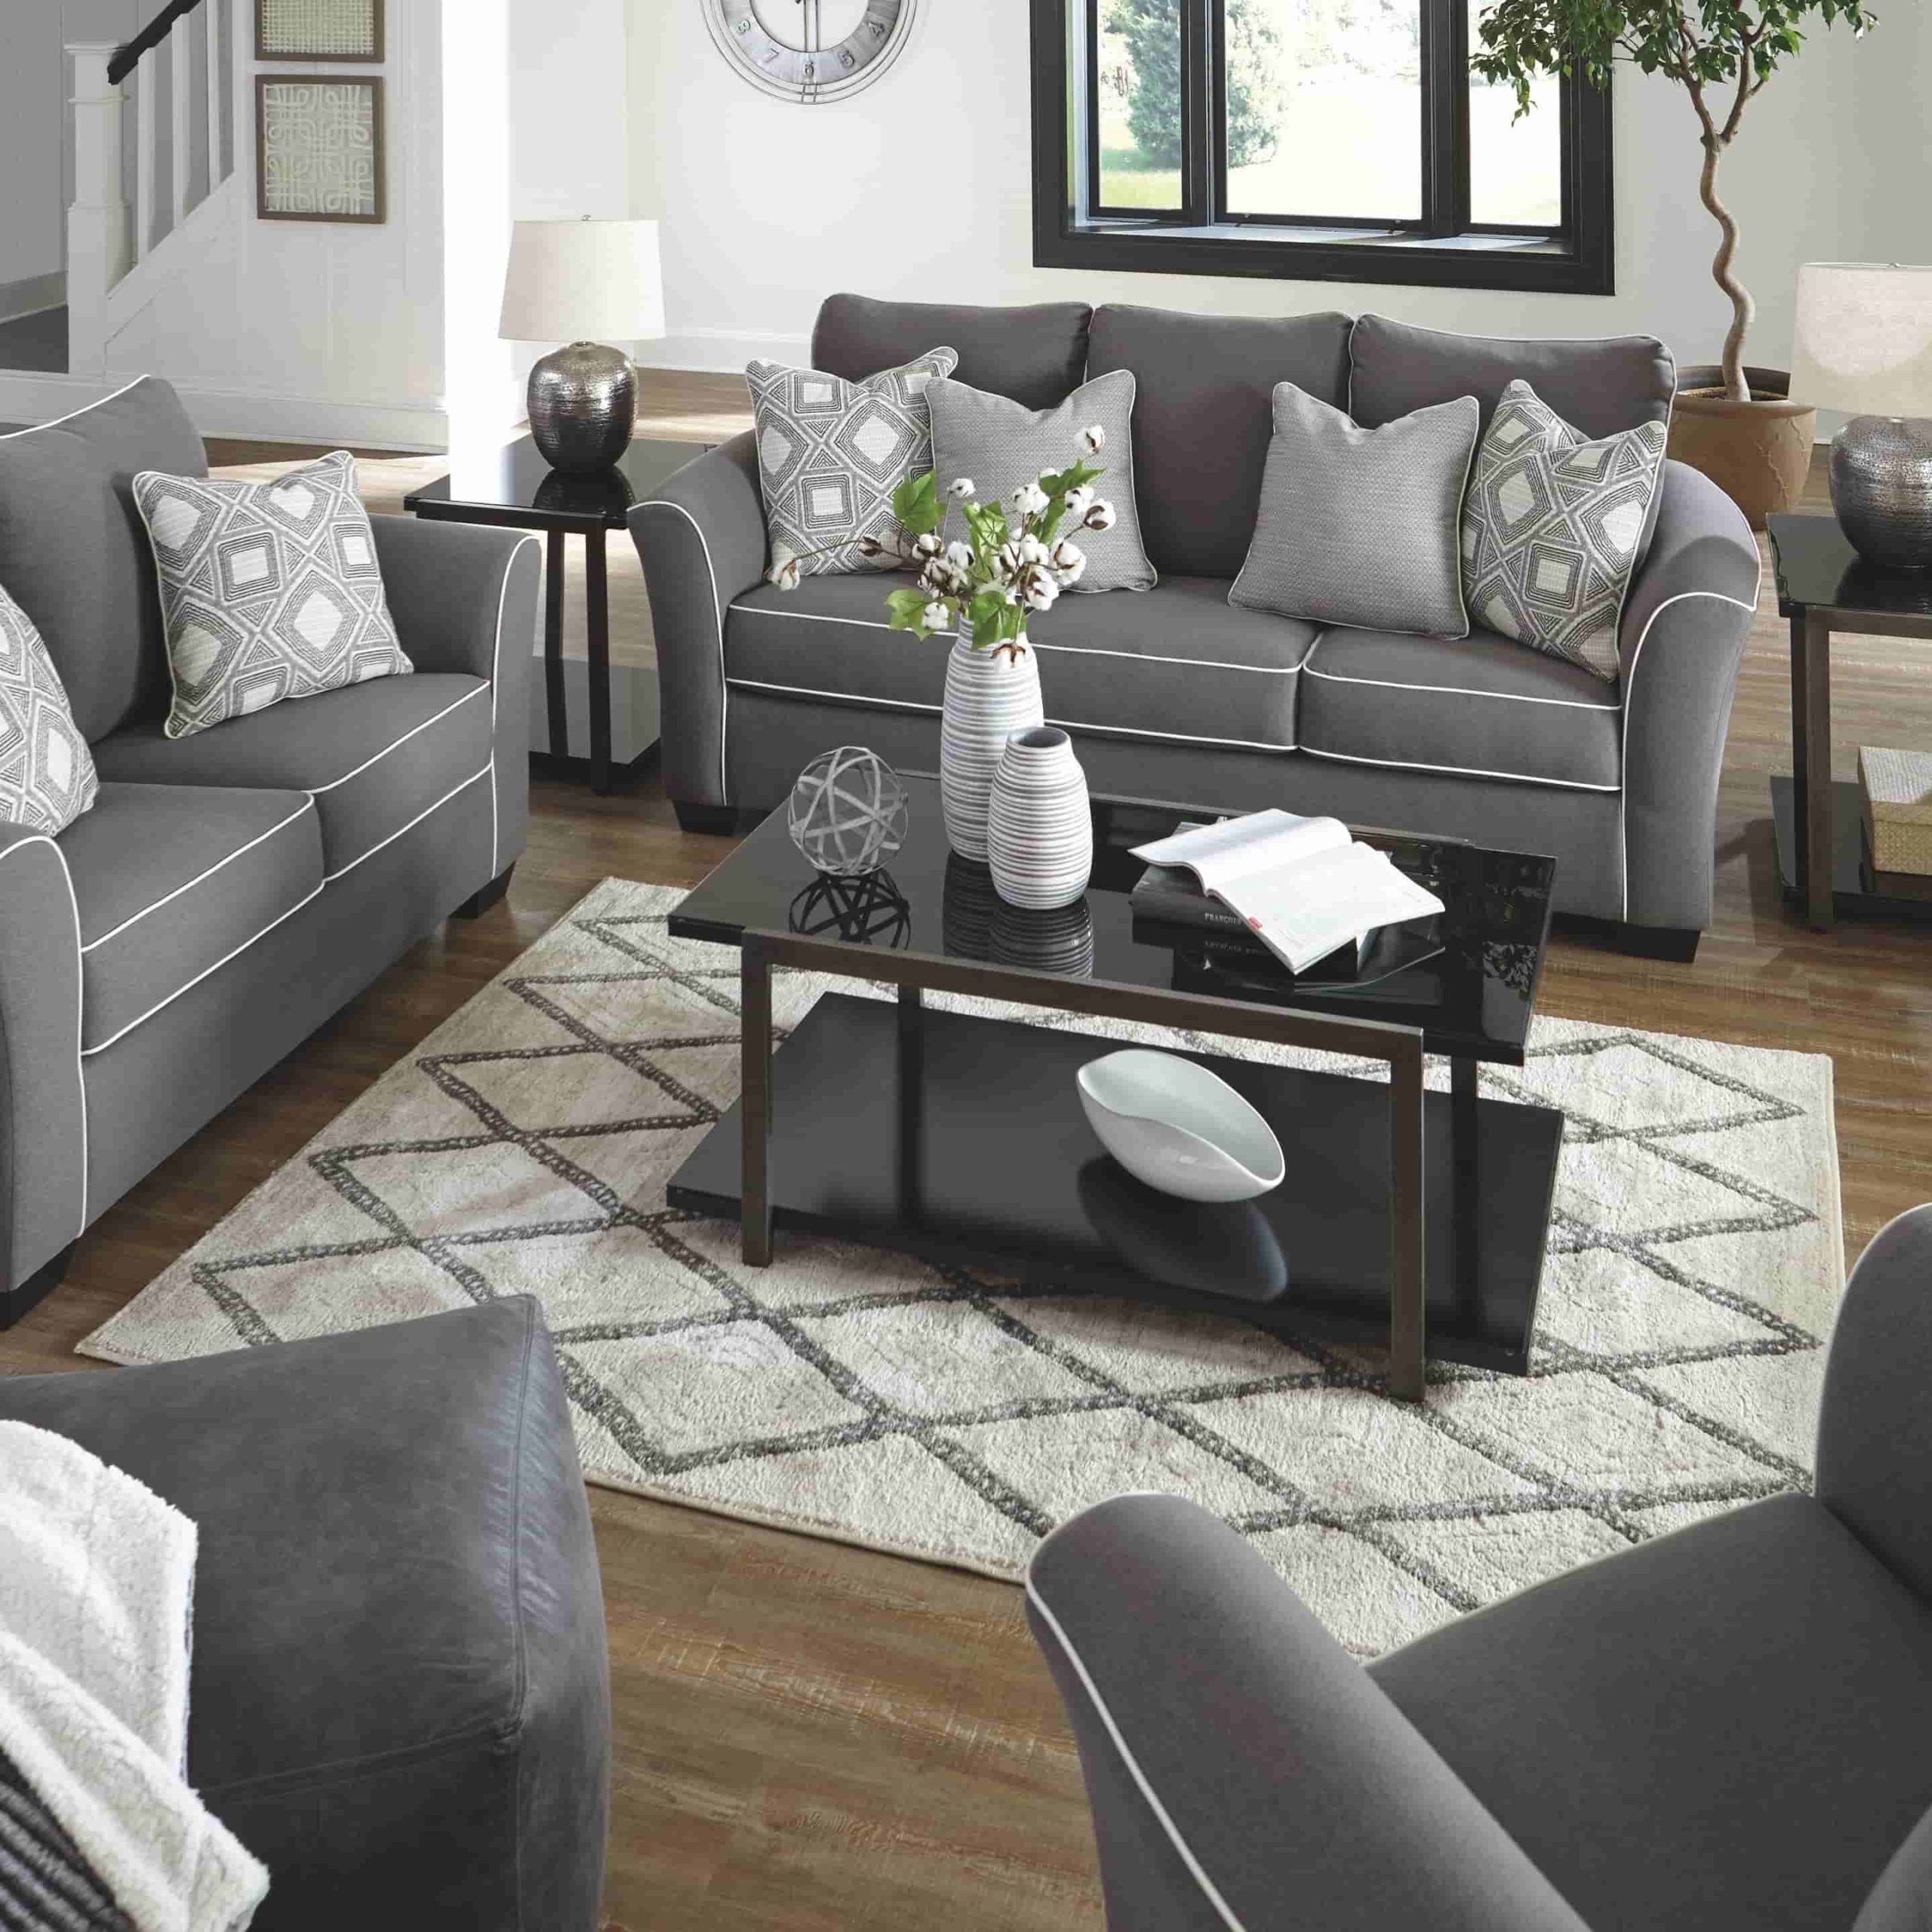 Domani-3-Seater-2-Seater-Armchair-Ottoman-Grey-Charcoal-Sofa-Suite-Couch-Living-Lounge-Fabric-Microfiber-Paphos-Furniture-Cyprus